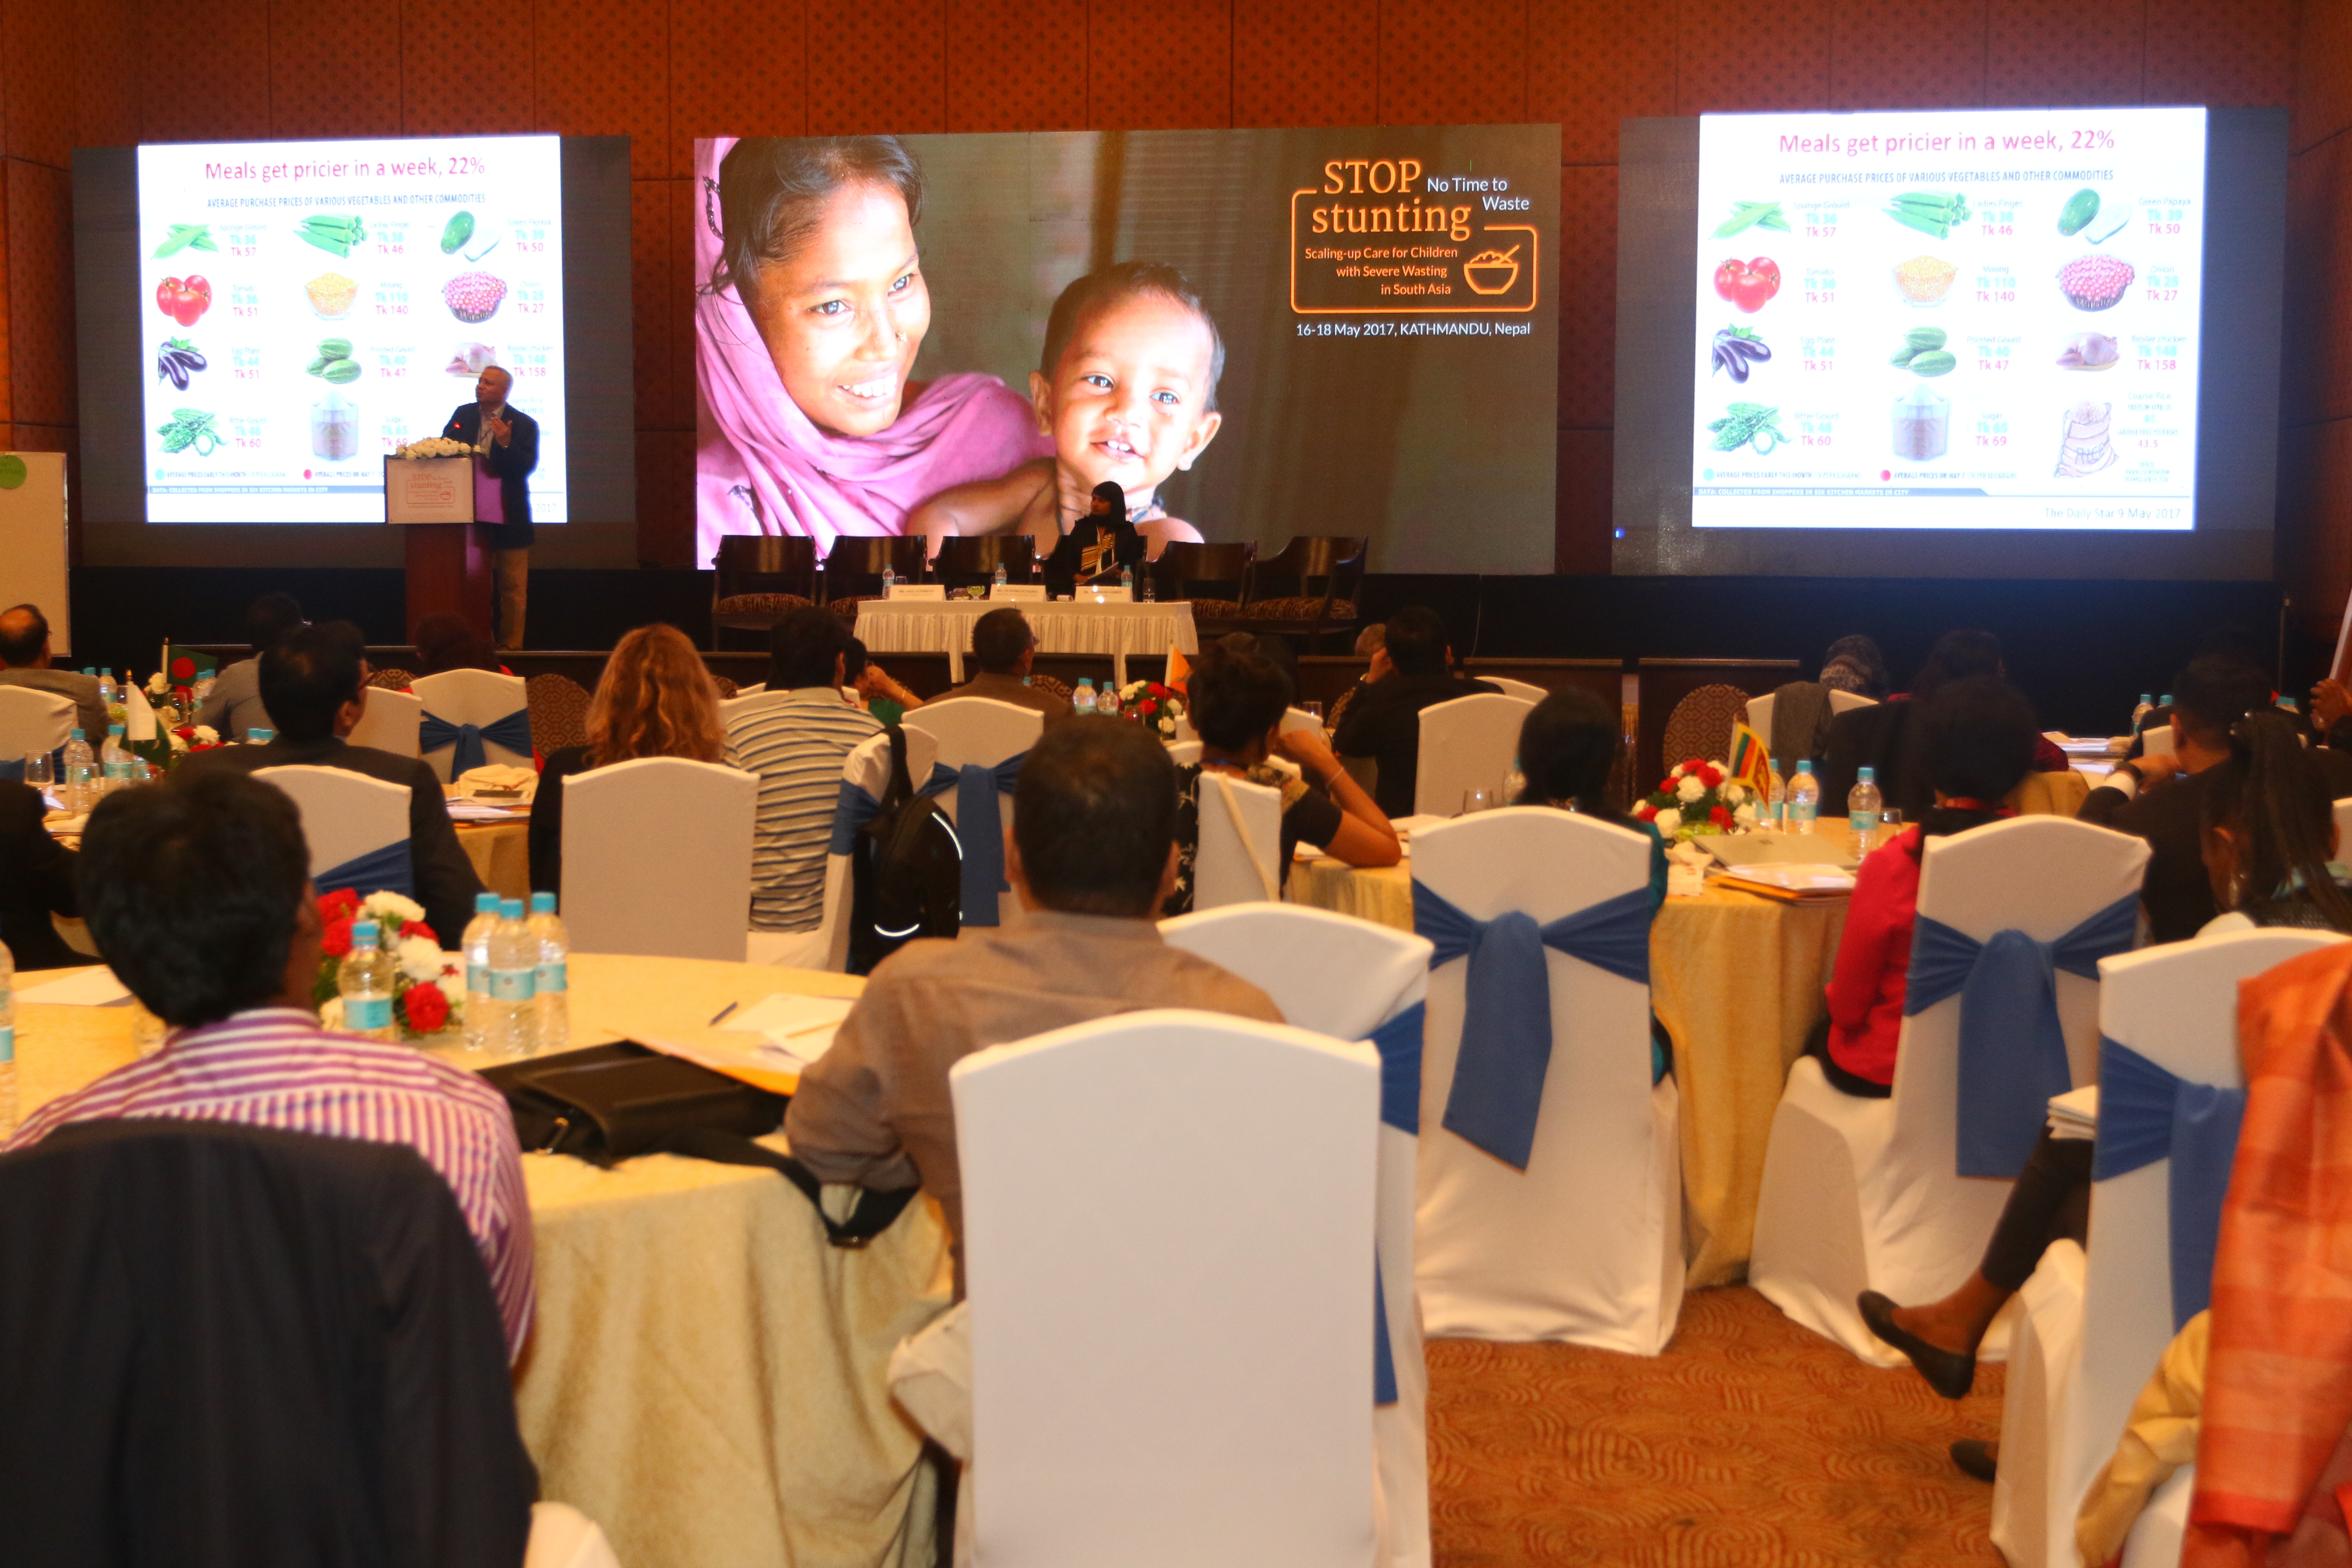 Image shows people attending a Regional conference in South Asia on Stunting and Wasting.